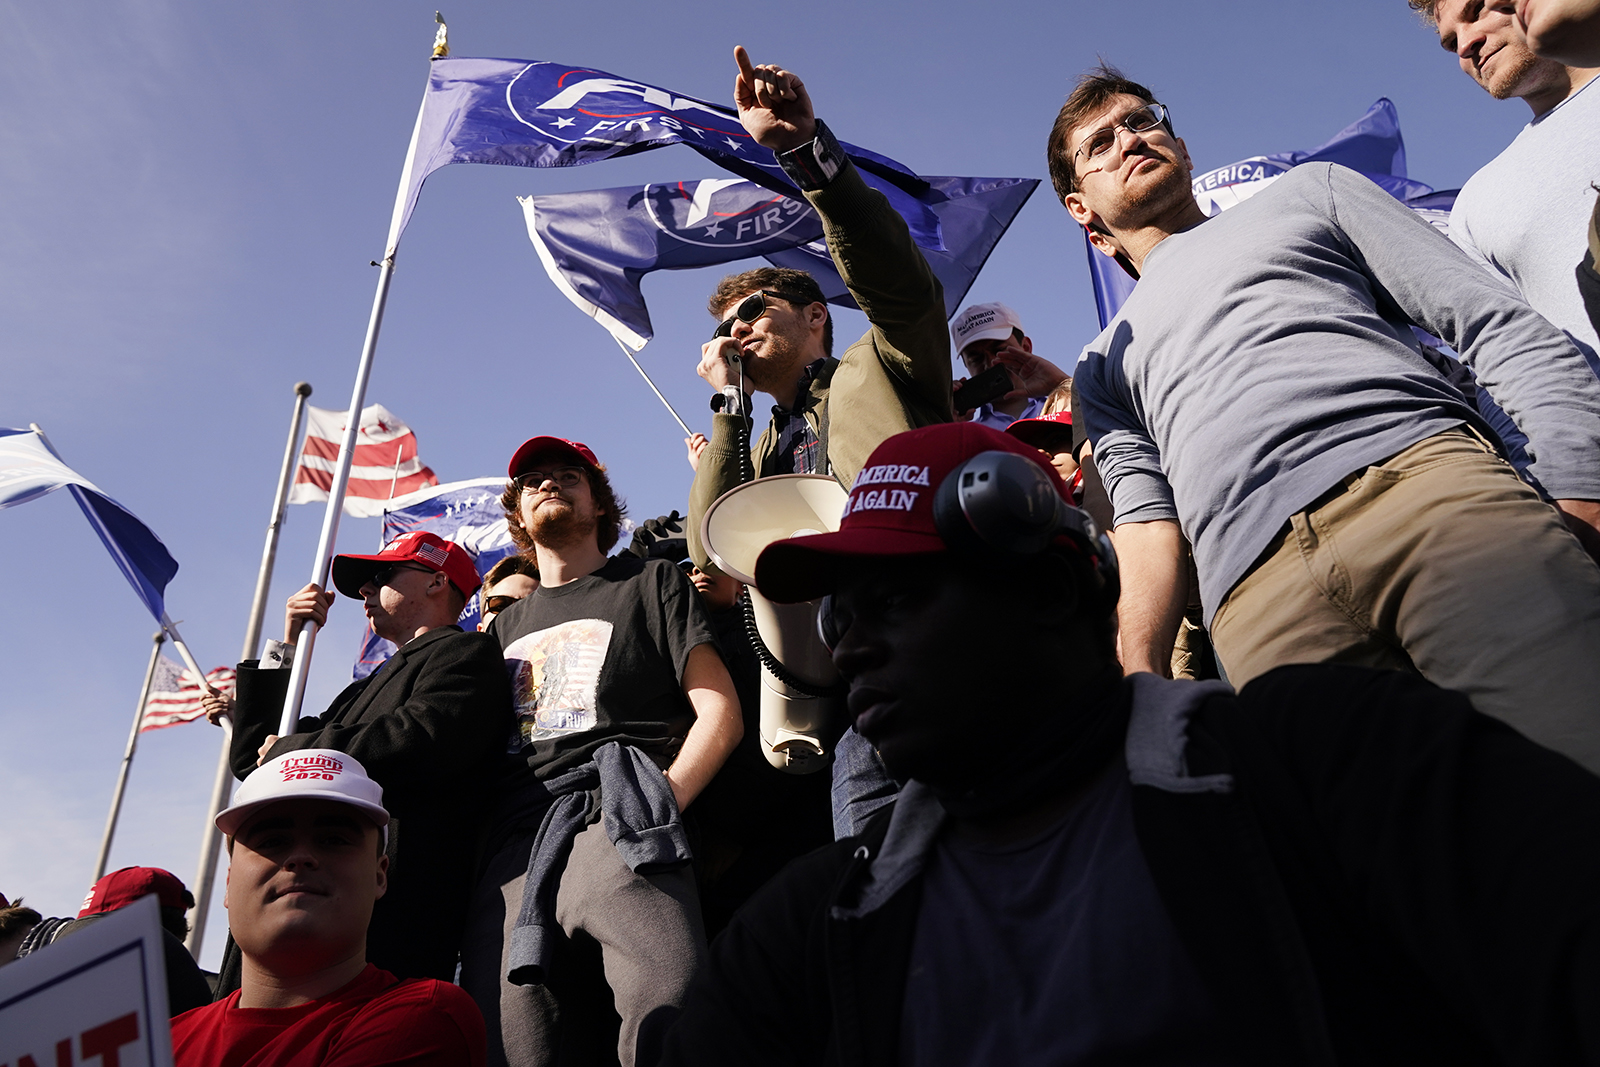 Nick Fuentes, center, speaks to supporters of President Donald Trump during a pro-Trump march Saturday, Nov. 14, 2020, in Washington. (AP Photo/Jacquelyn Martin)